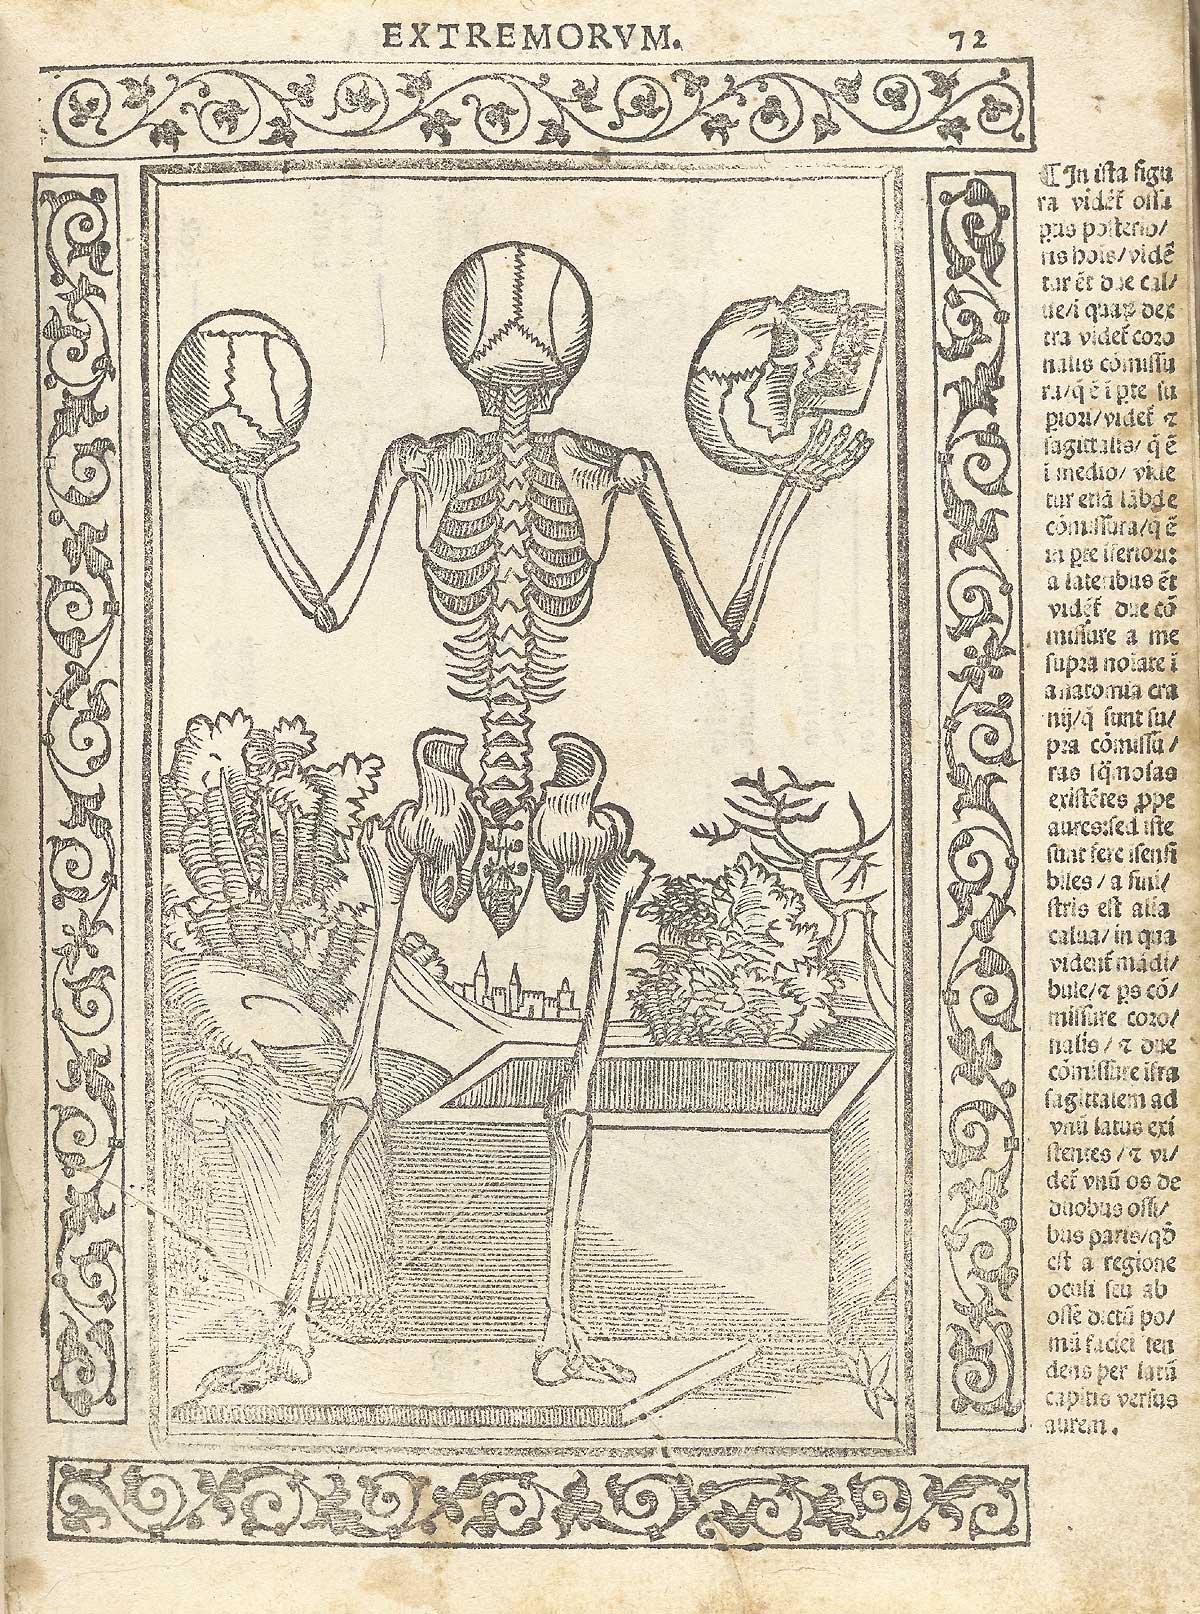 Woodcut skeleton figure, with back to audience, holding up a skull in each hand, one in profile, in a pastoral setting, in front of an opened sepulchre; with a woodcut border and text in Latin on the right side of page, from Berengario da Carpi’s Isagogae breues, Bologna, 1523, NLM Call no. WZ 240 B488i 1523.